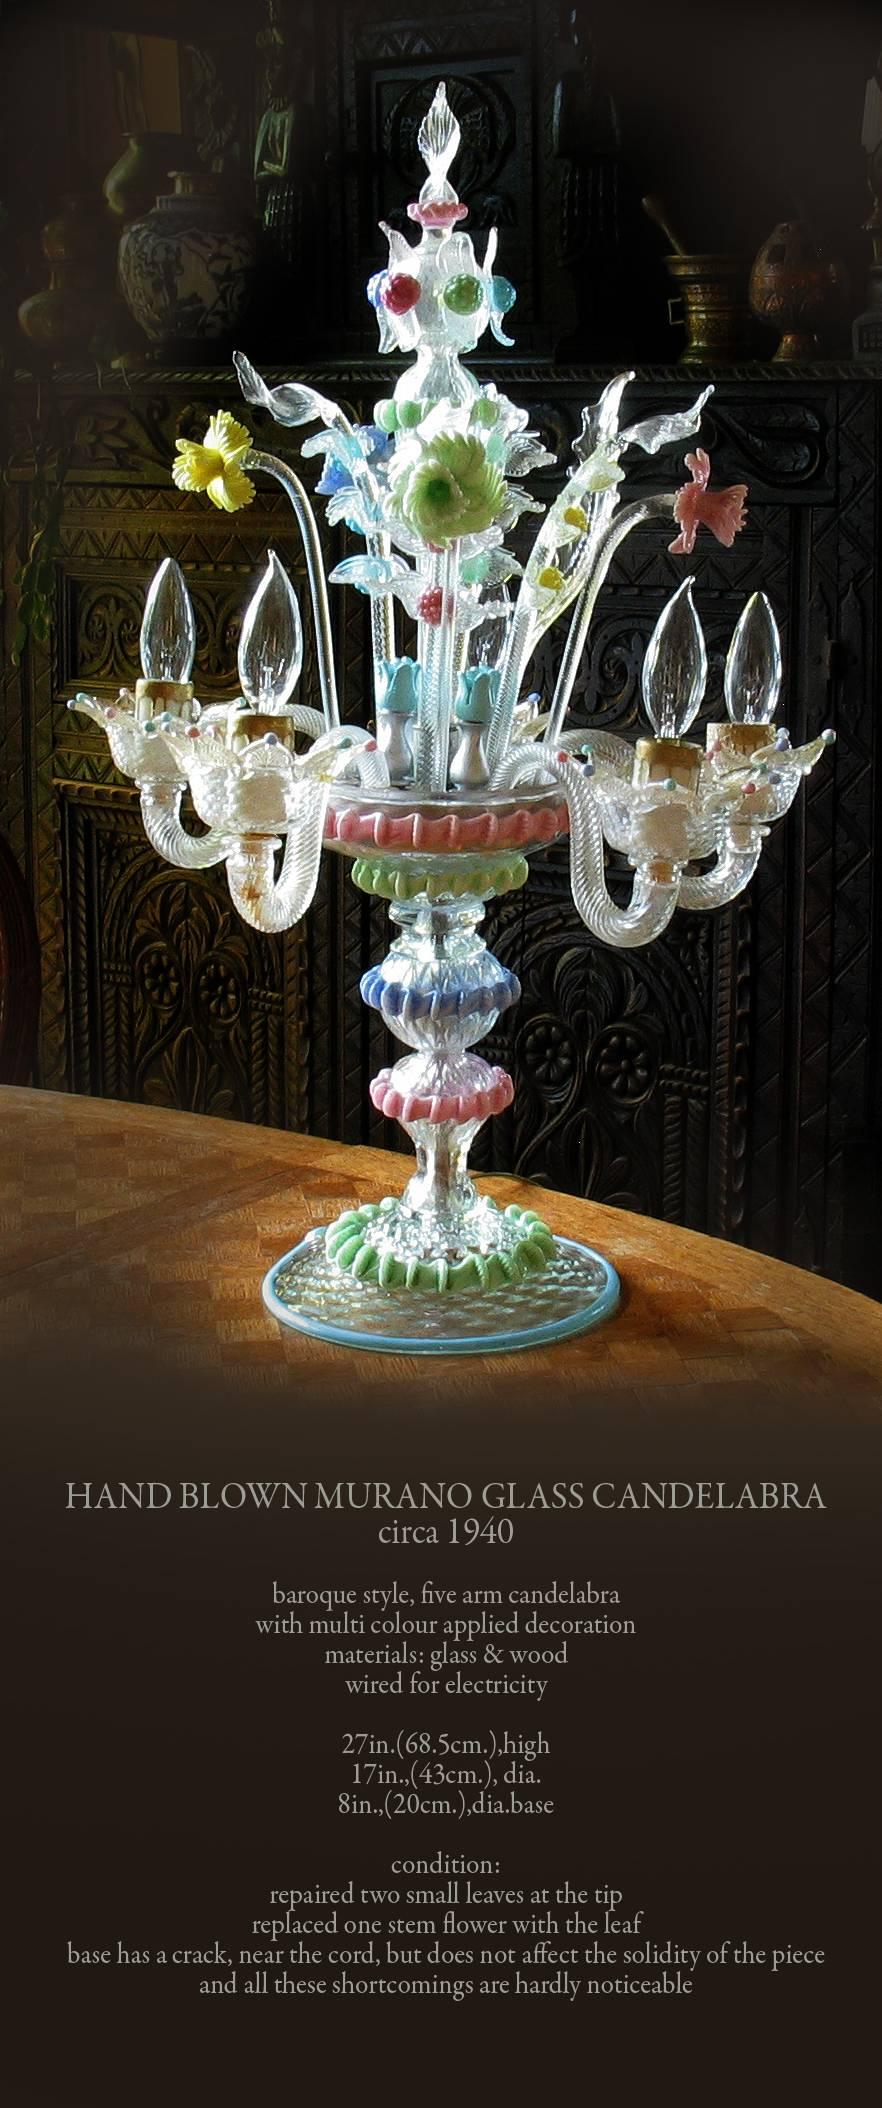 Handblown Murano glass candelabra, multicolored, circa 1940, Baroque style, five-arm candelabra with multicolored applied decoration, materials: glass and wood, wired for electricity, The candelabra measures 27